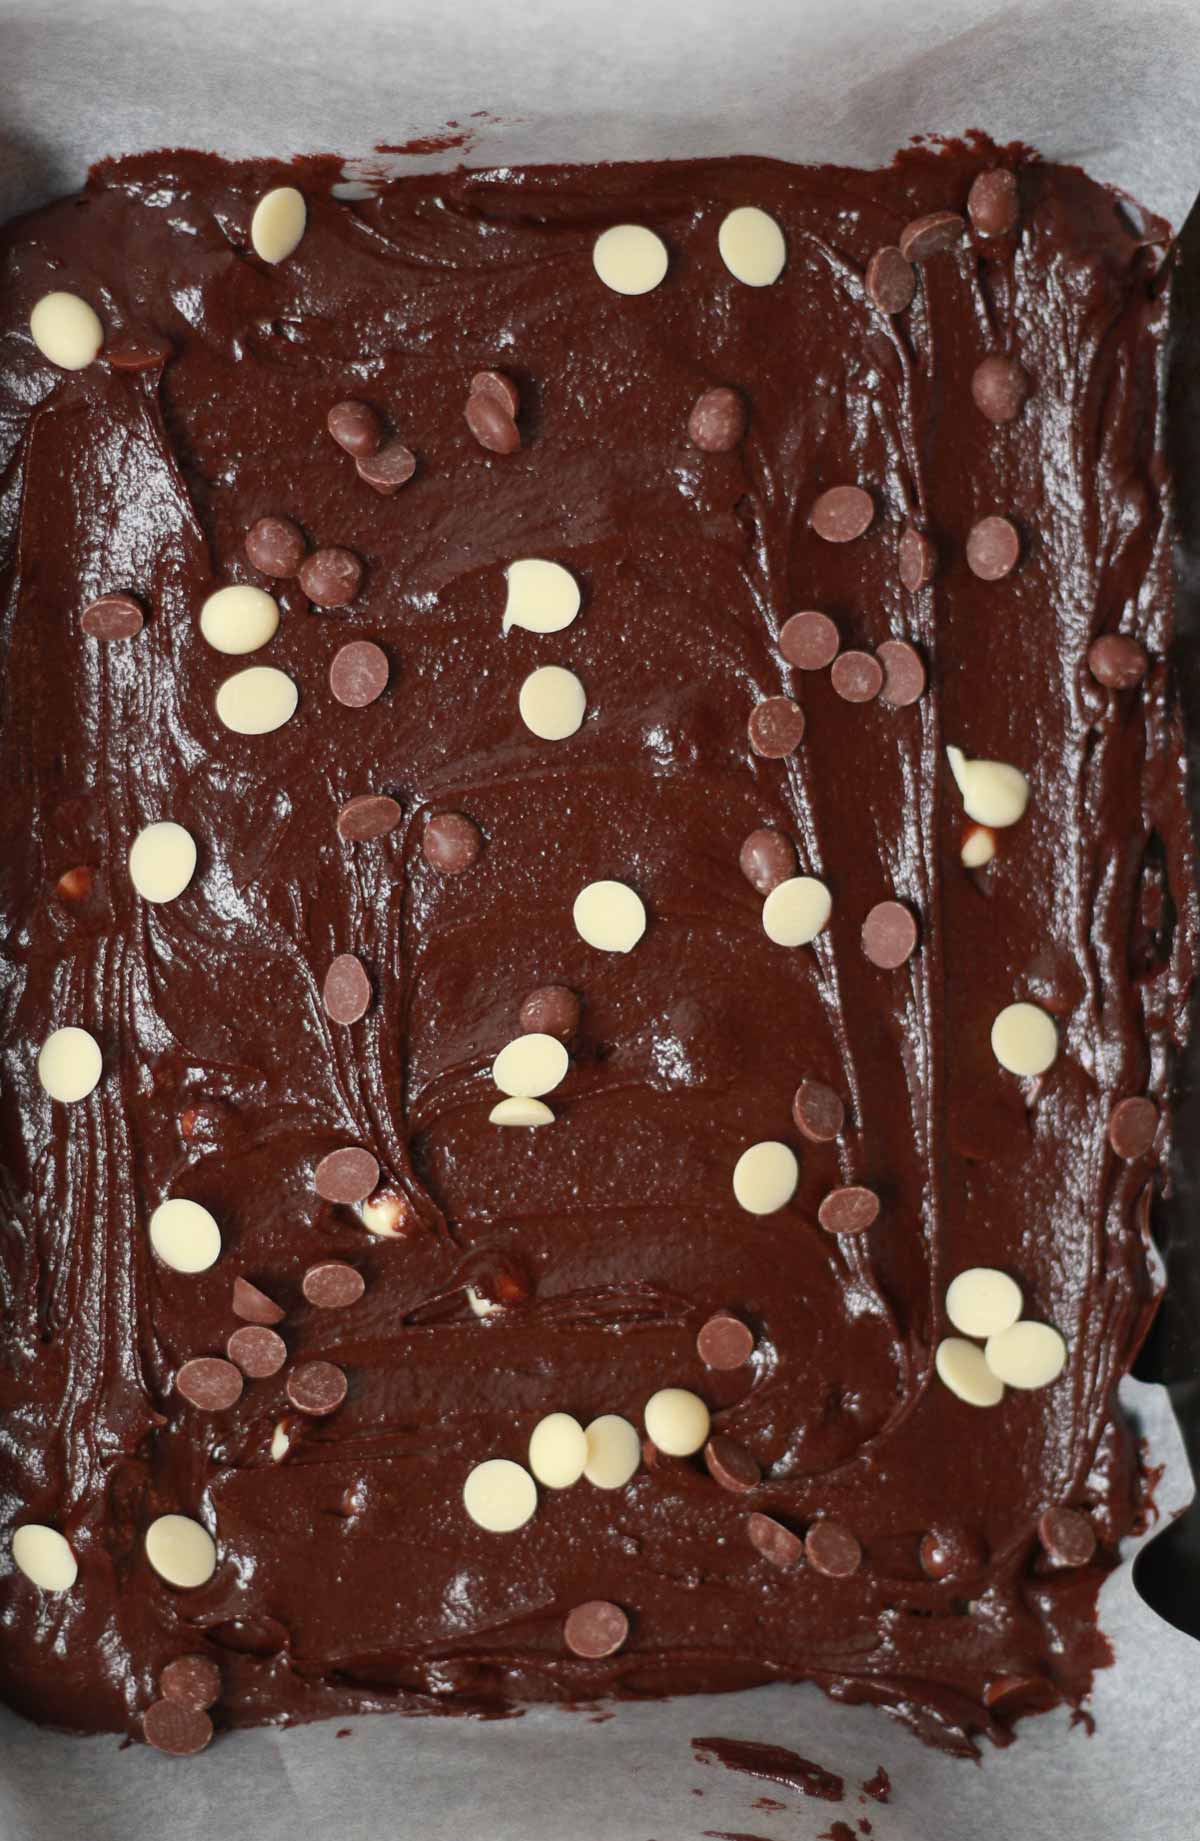 Batter In A Lined Tin With Chocolate Chips Sprinkled On Top